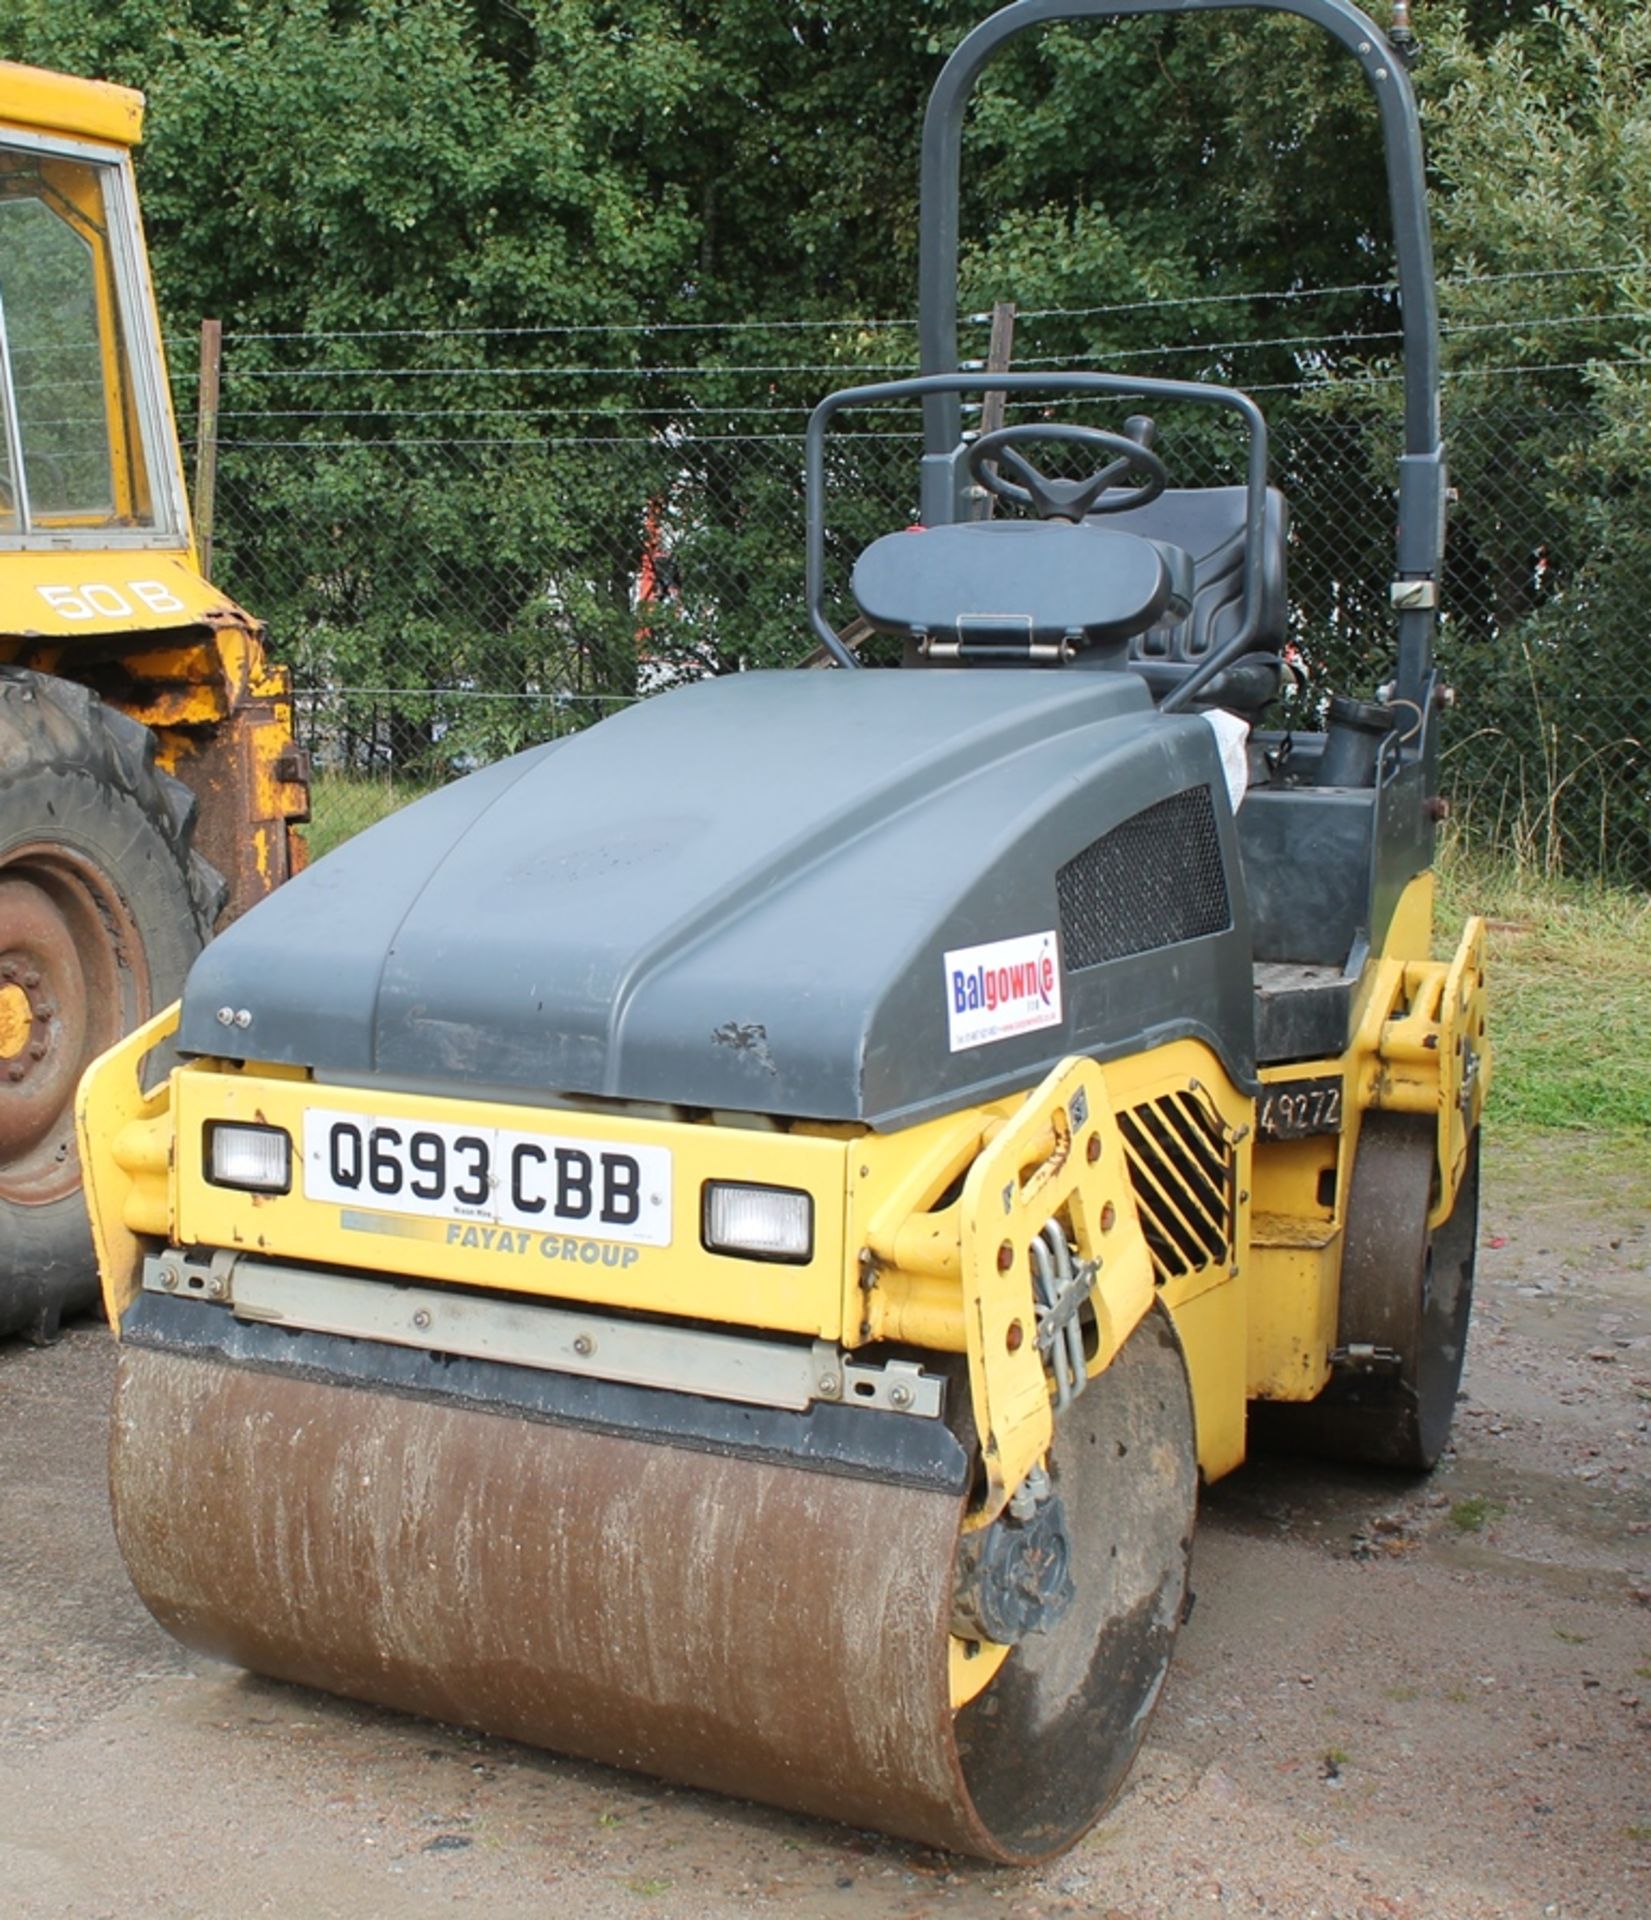 Bomag Bw120 Ad-4 Unknown - 1647cc Tractor